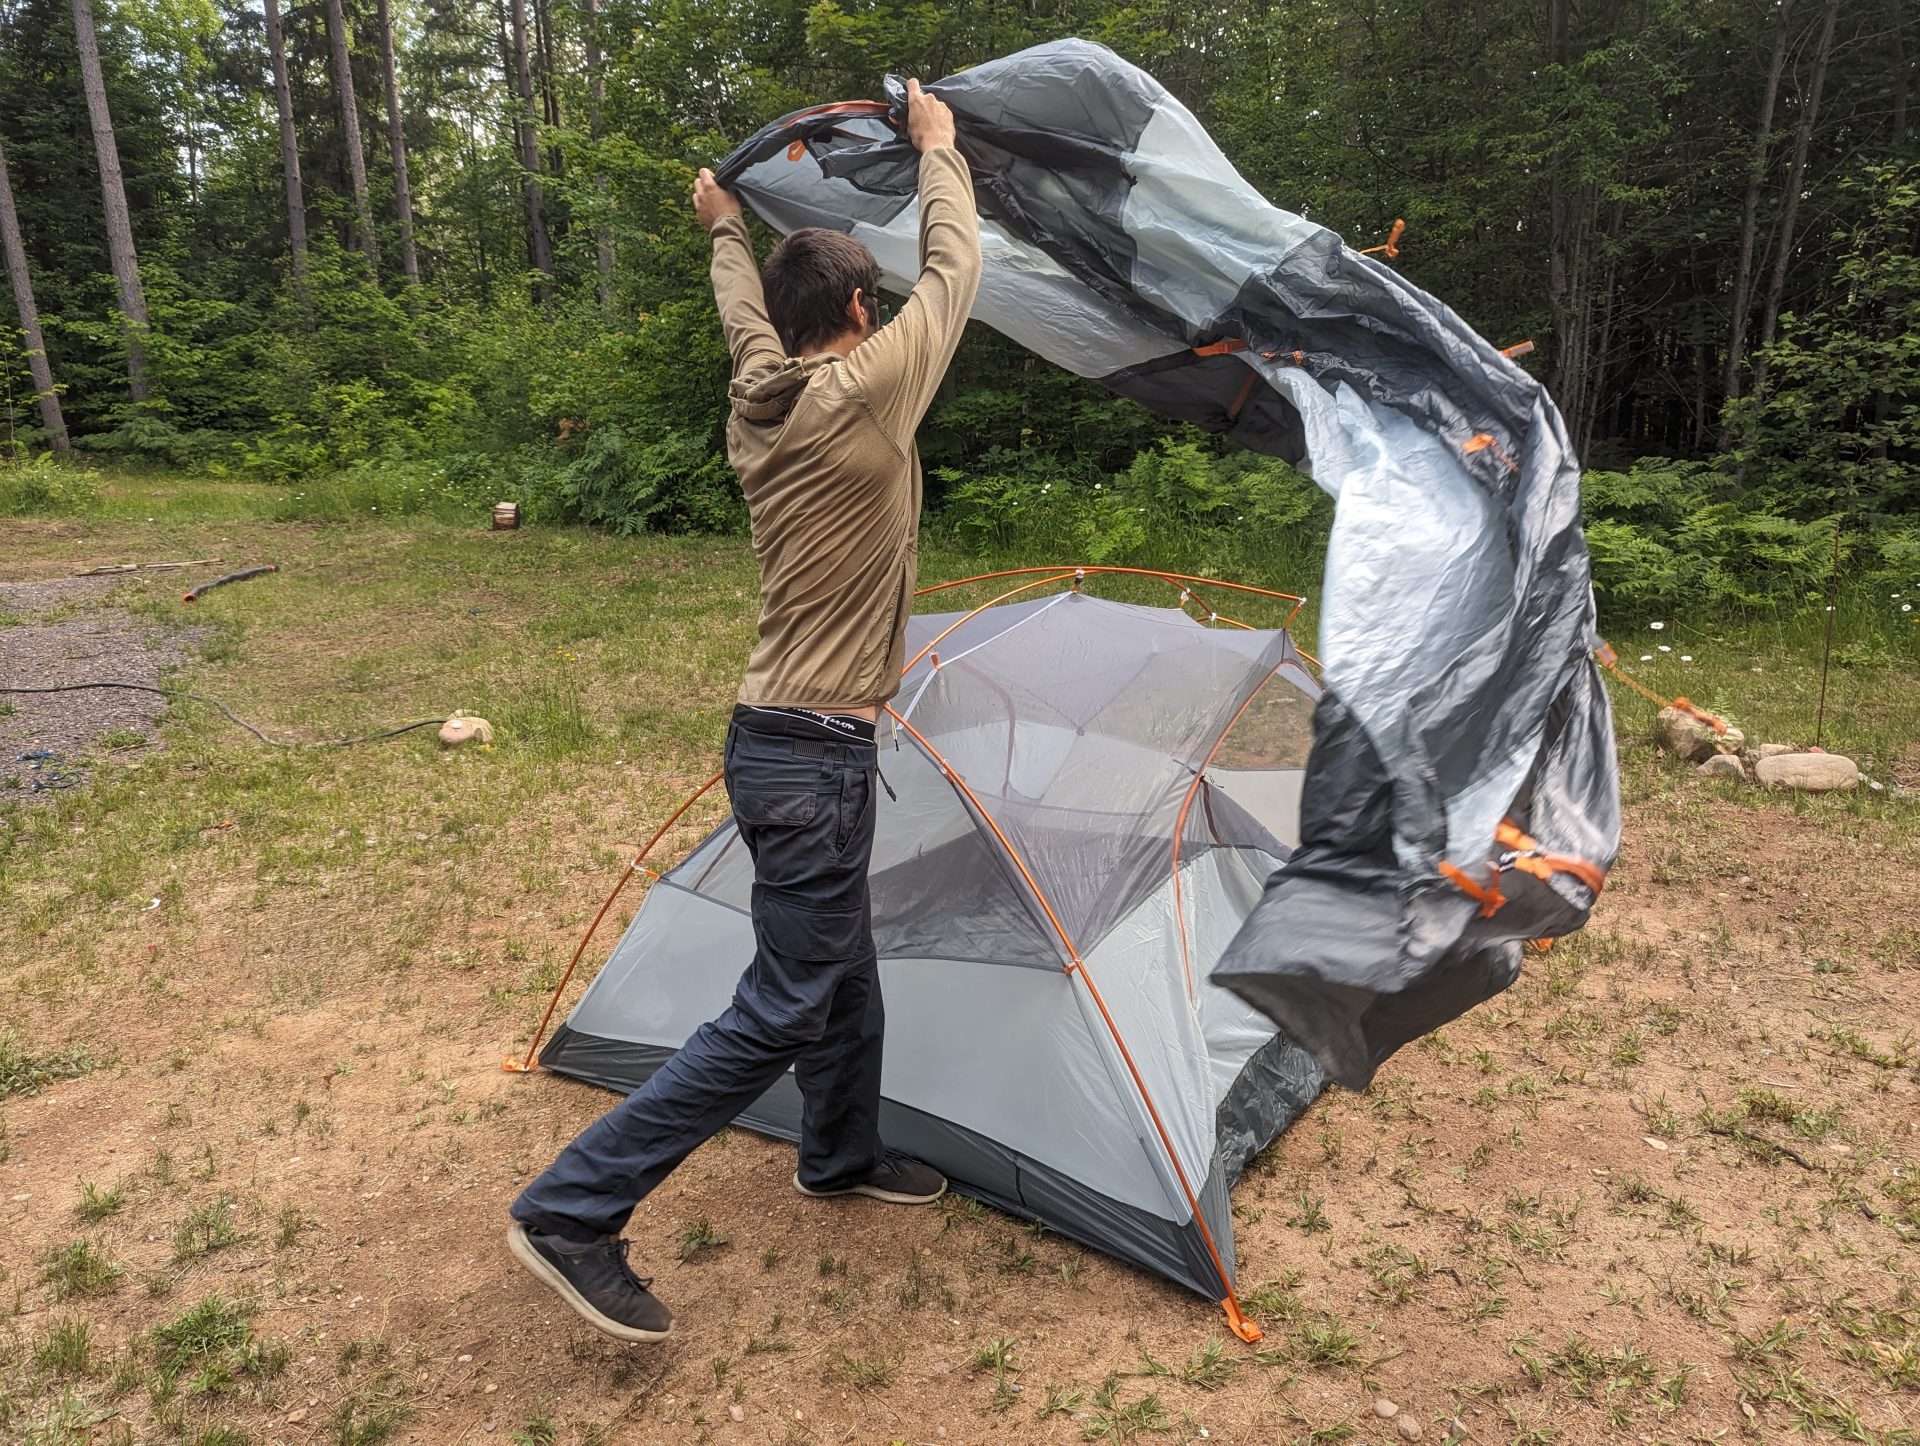 installing a rainfly on a backpacking tent 